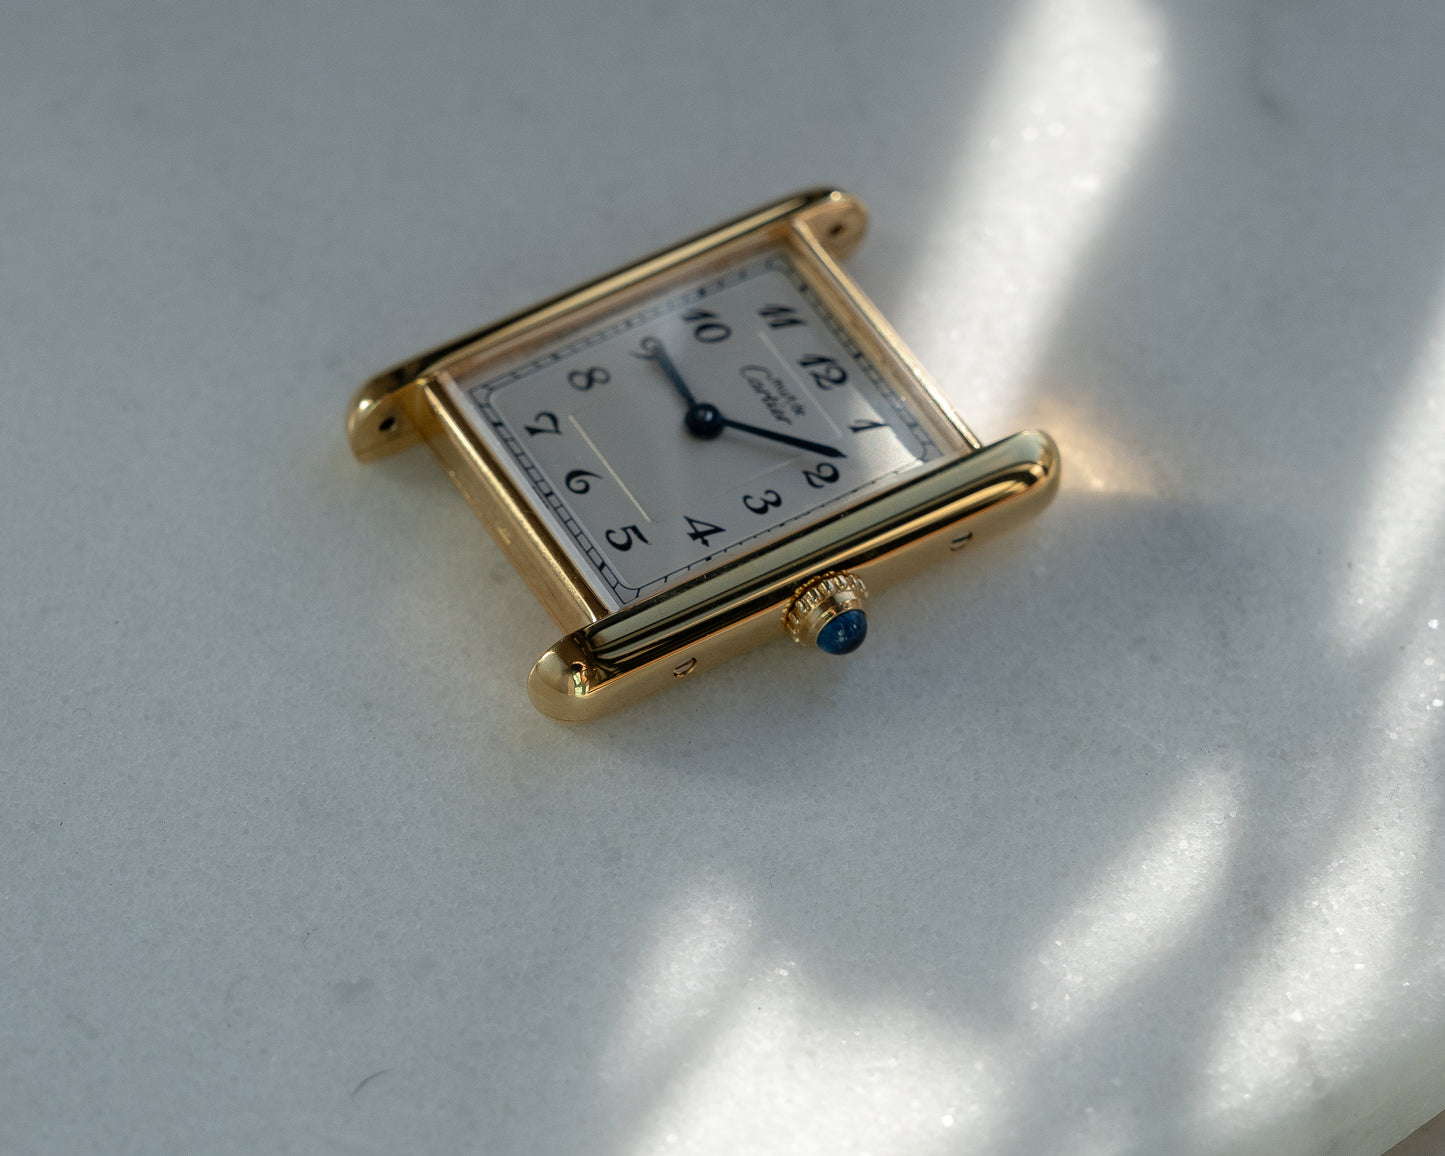 Must de Cartier Tank Breguet Numerals - LM size - box and papers